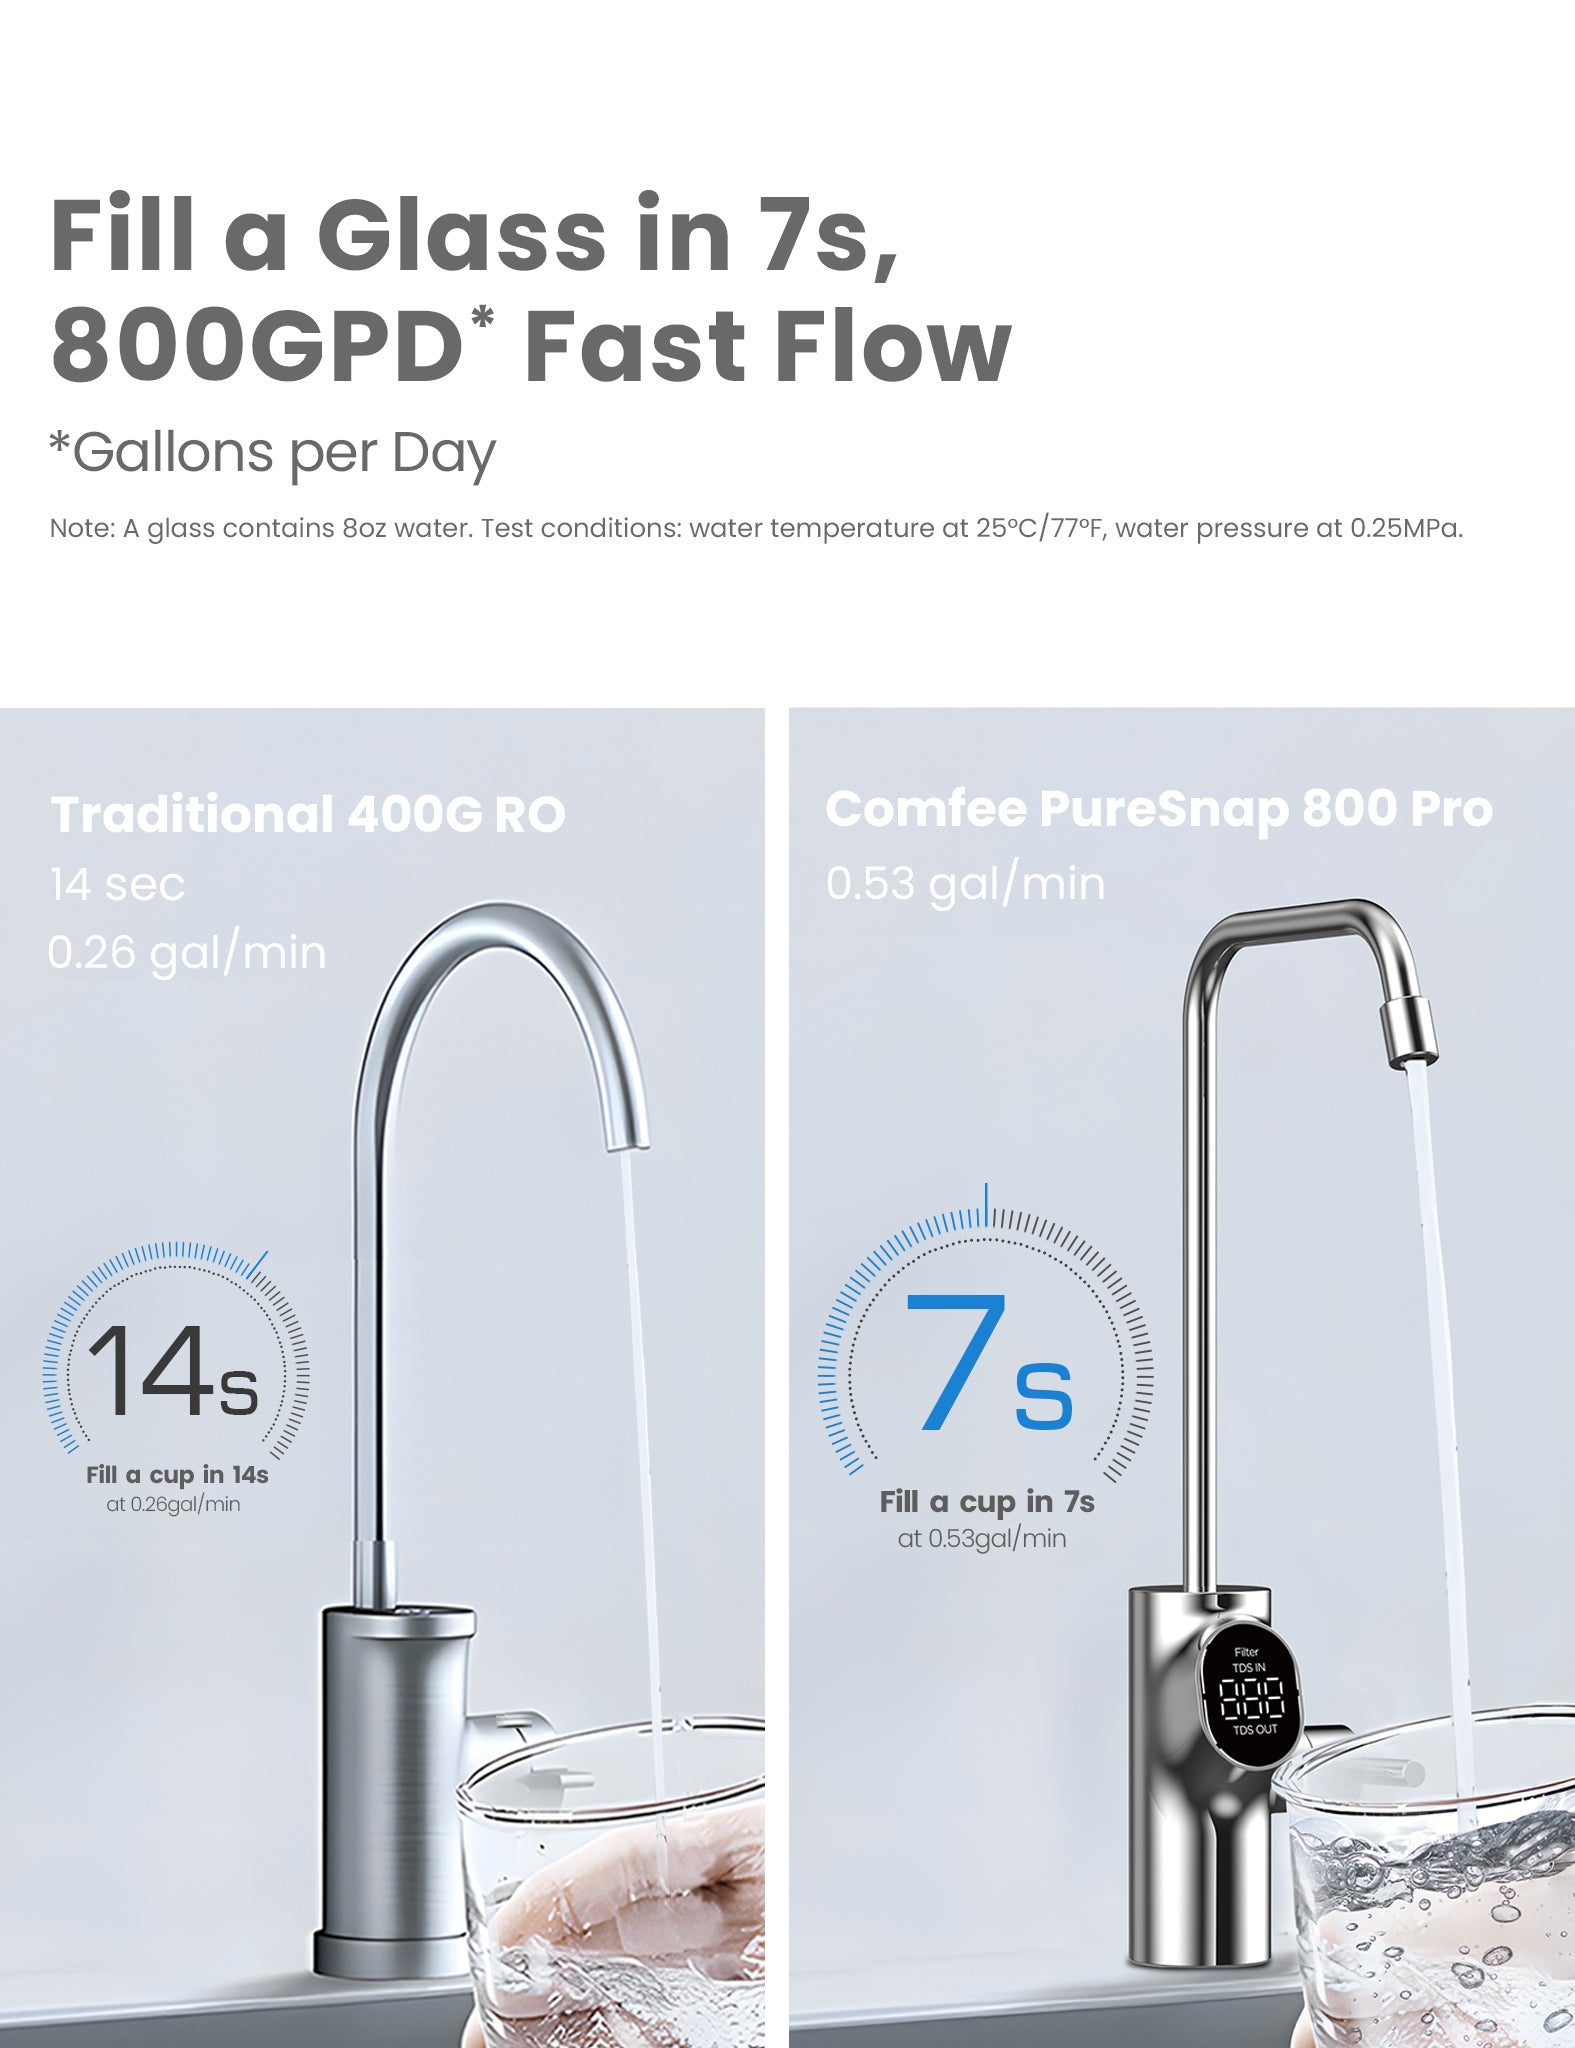 a comparison of water flow between 800gpd and traditional one